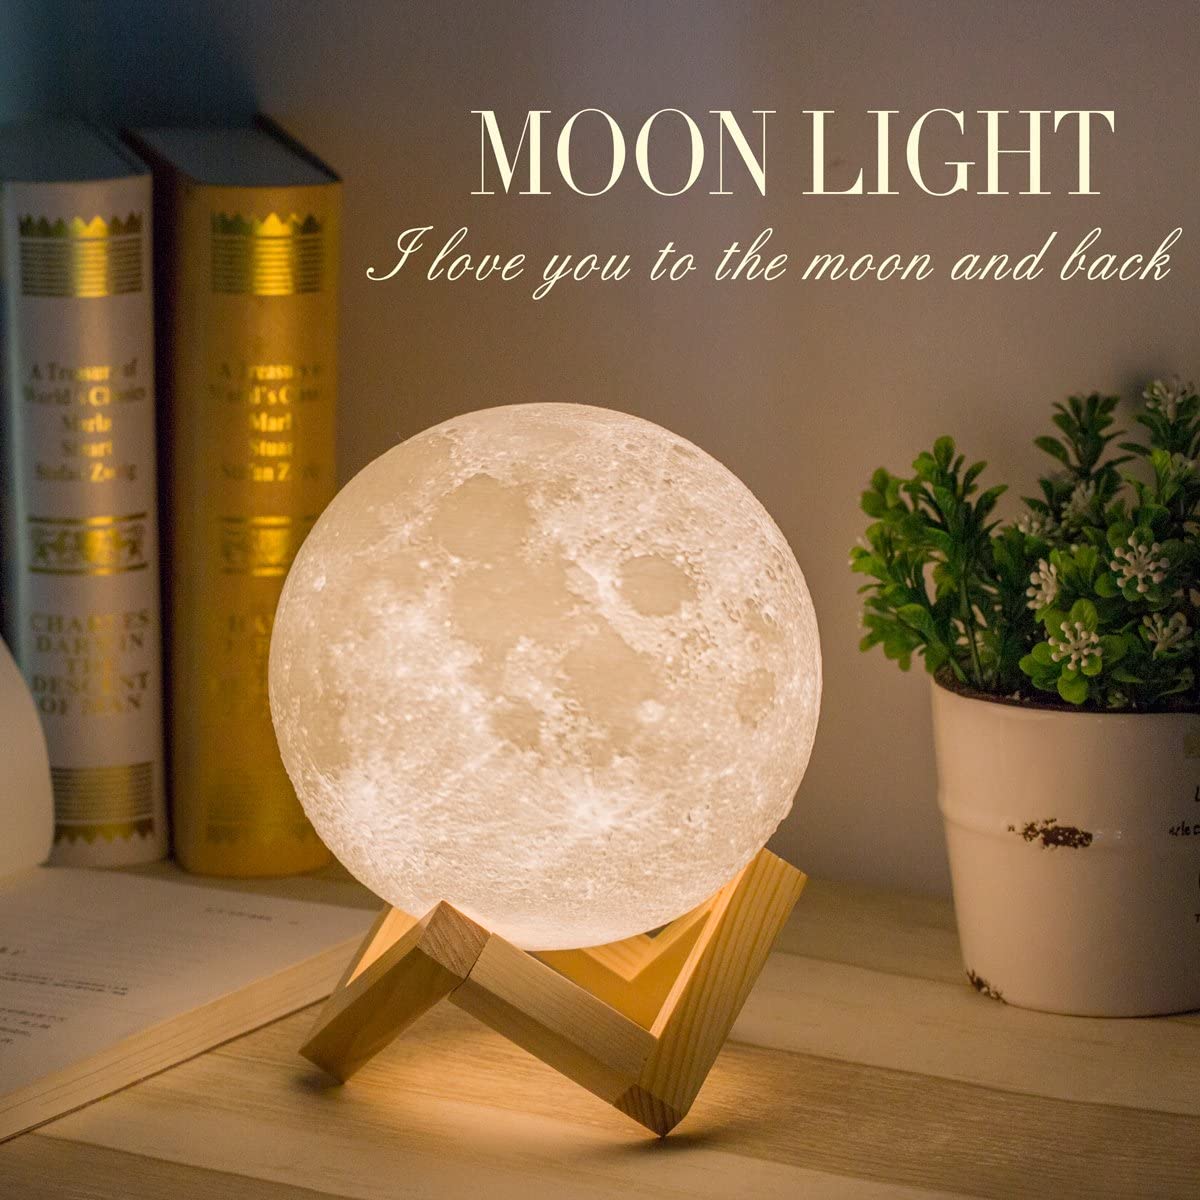 Mydethun Moon Lamp Moon Light Night Light for Kids Gift for Women USB Charging and Touch Control Brightness 3D Printed Warm and Cool White Lunar Lamp(5.9 in Moon lamp with Stand)